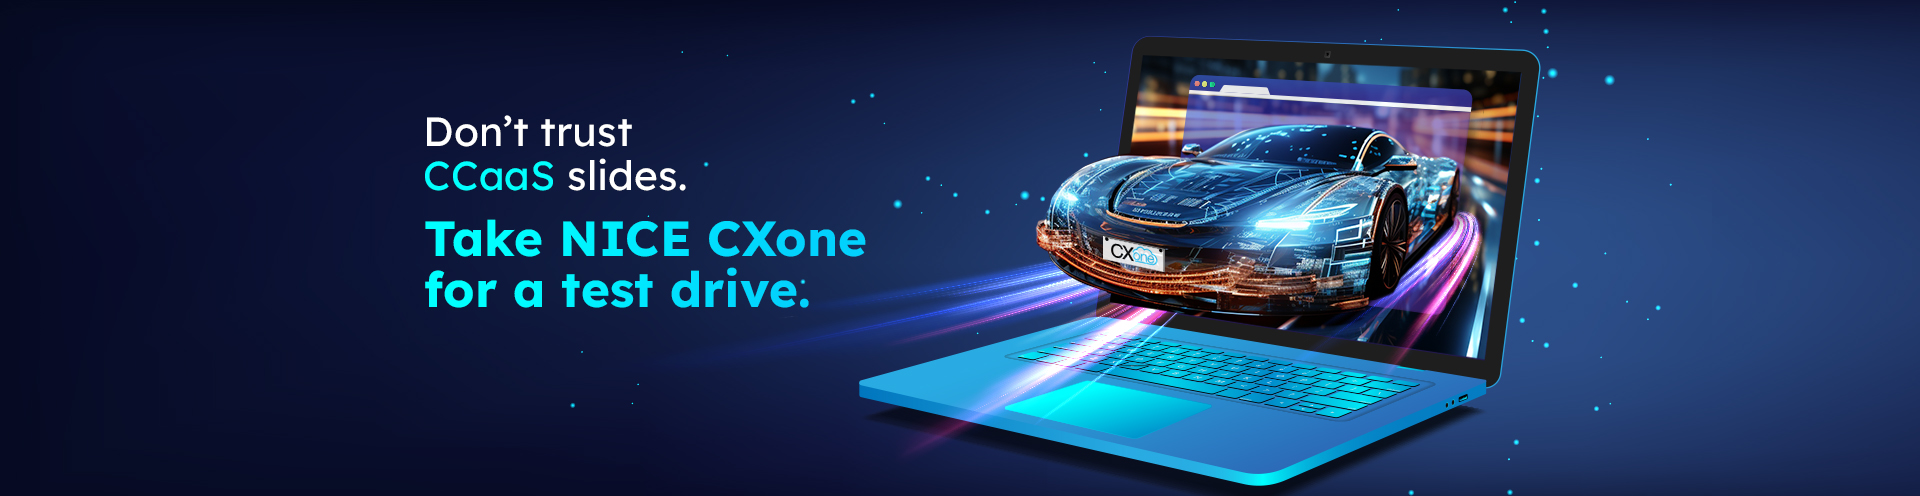 Don’t trust CCaaS slides. Take NICE CXone for a test drive.